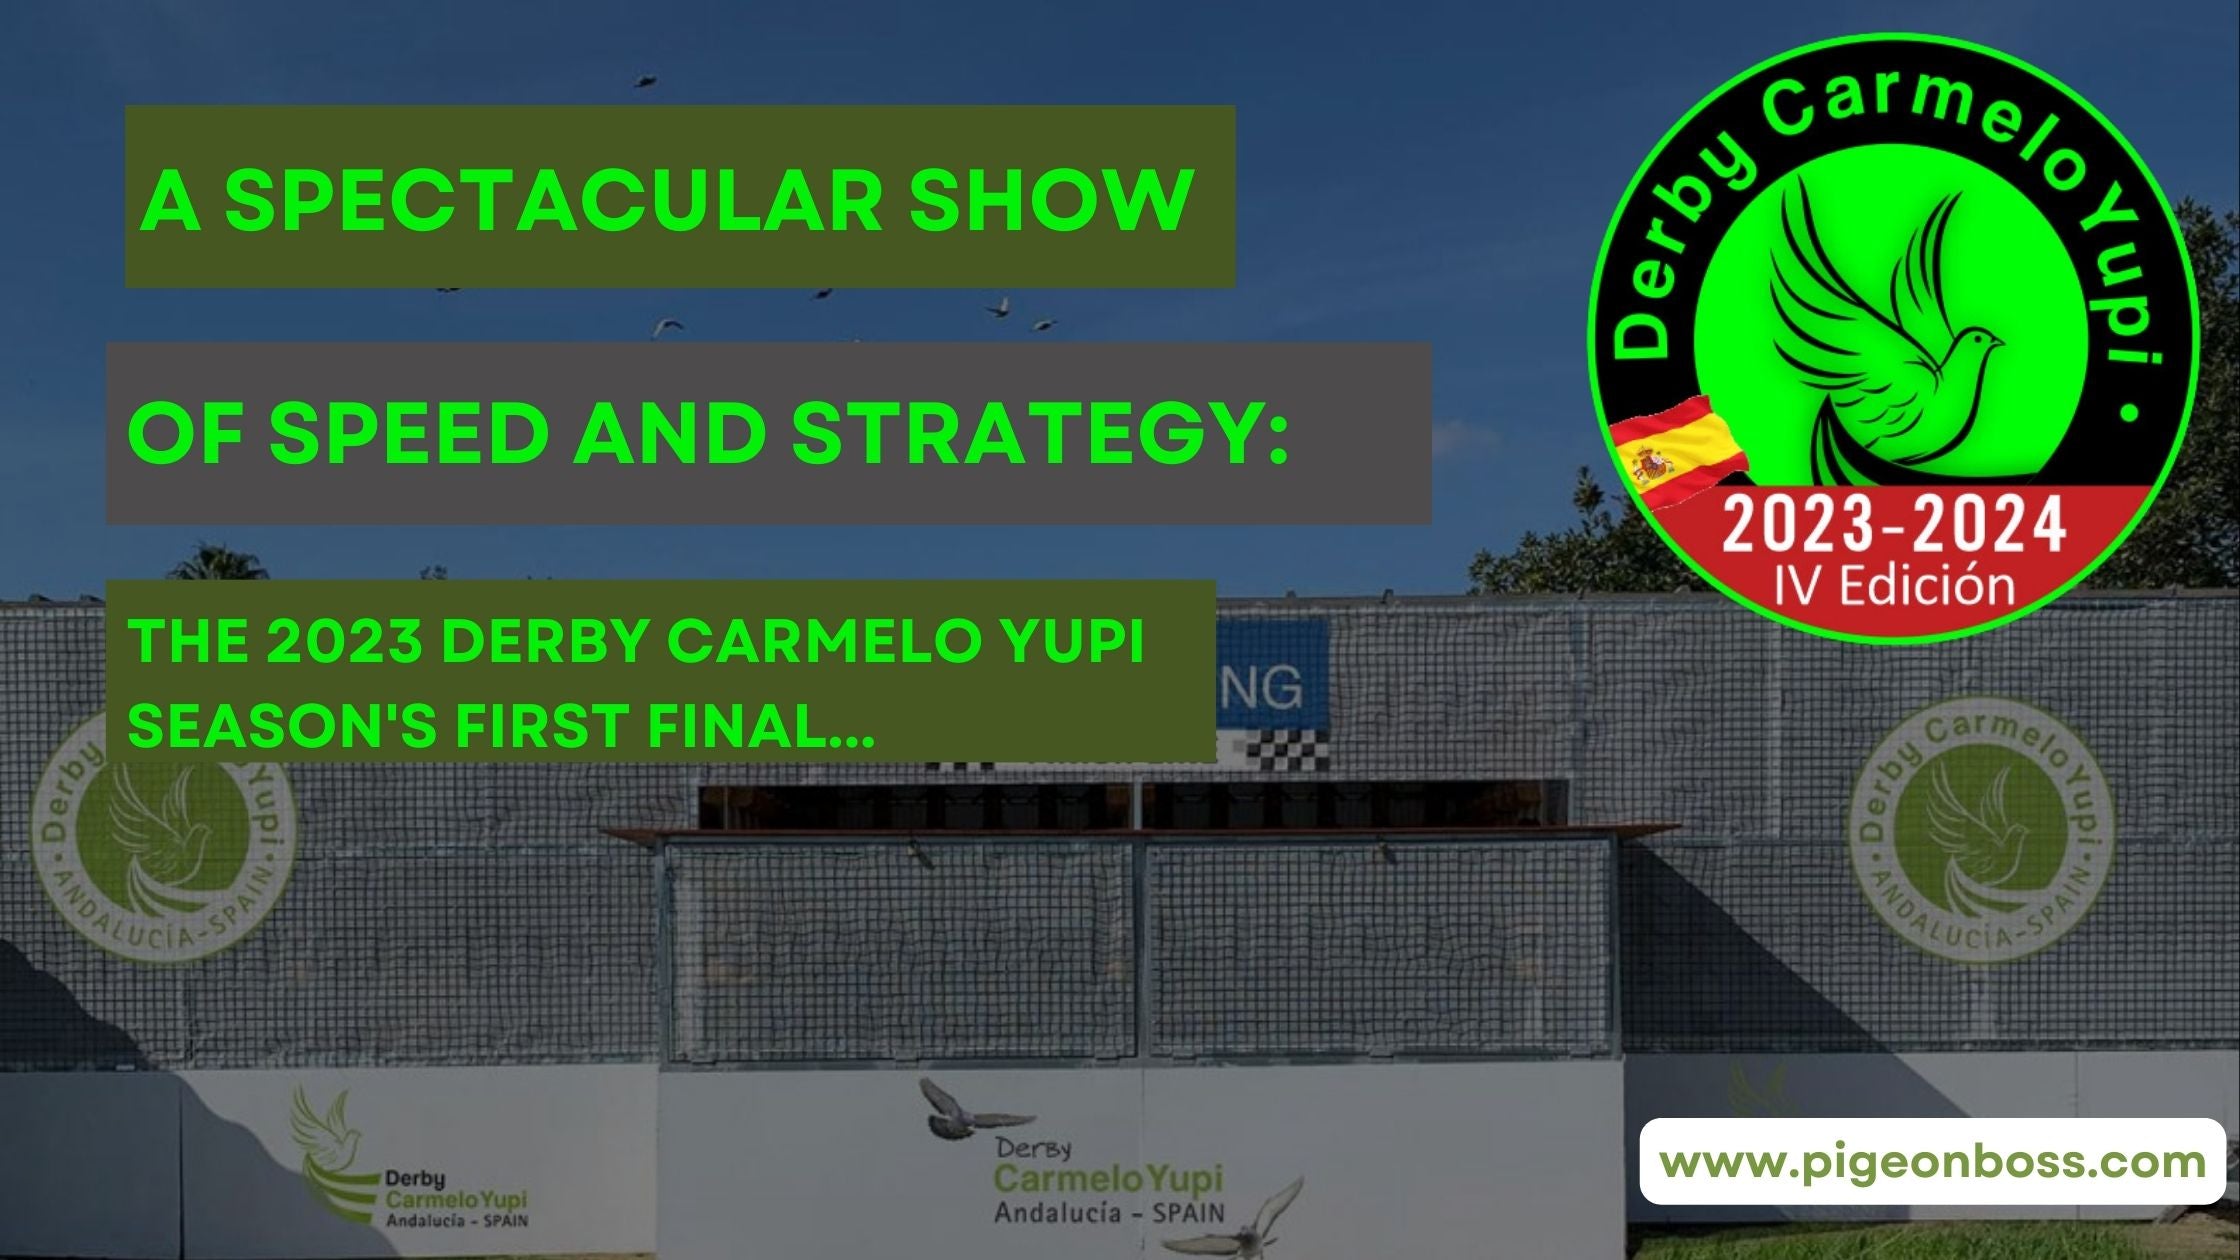 A Spectacular Show of Speed and Strategy: The 2023 Derby Carmelo Yupi Season's First Final